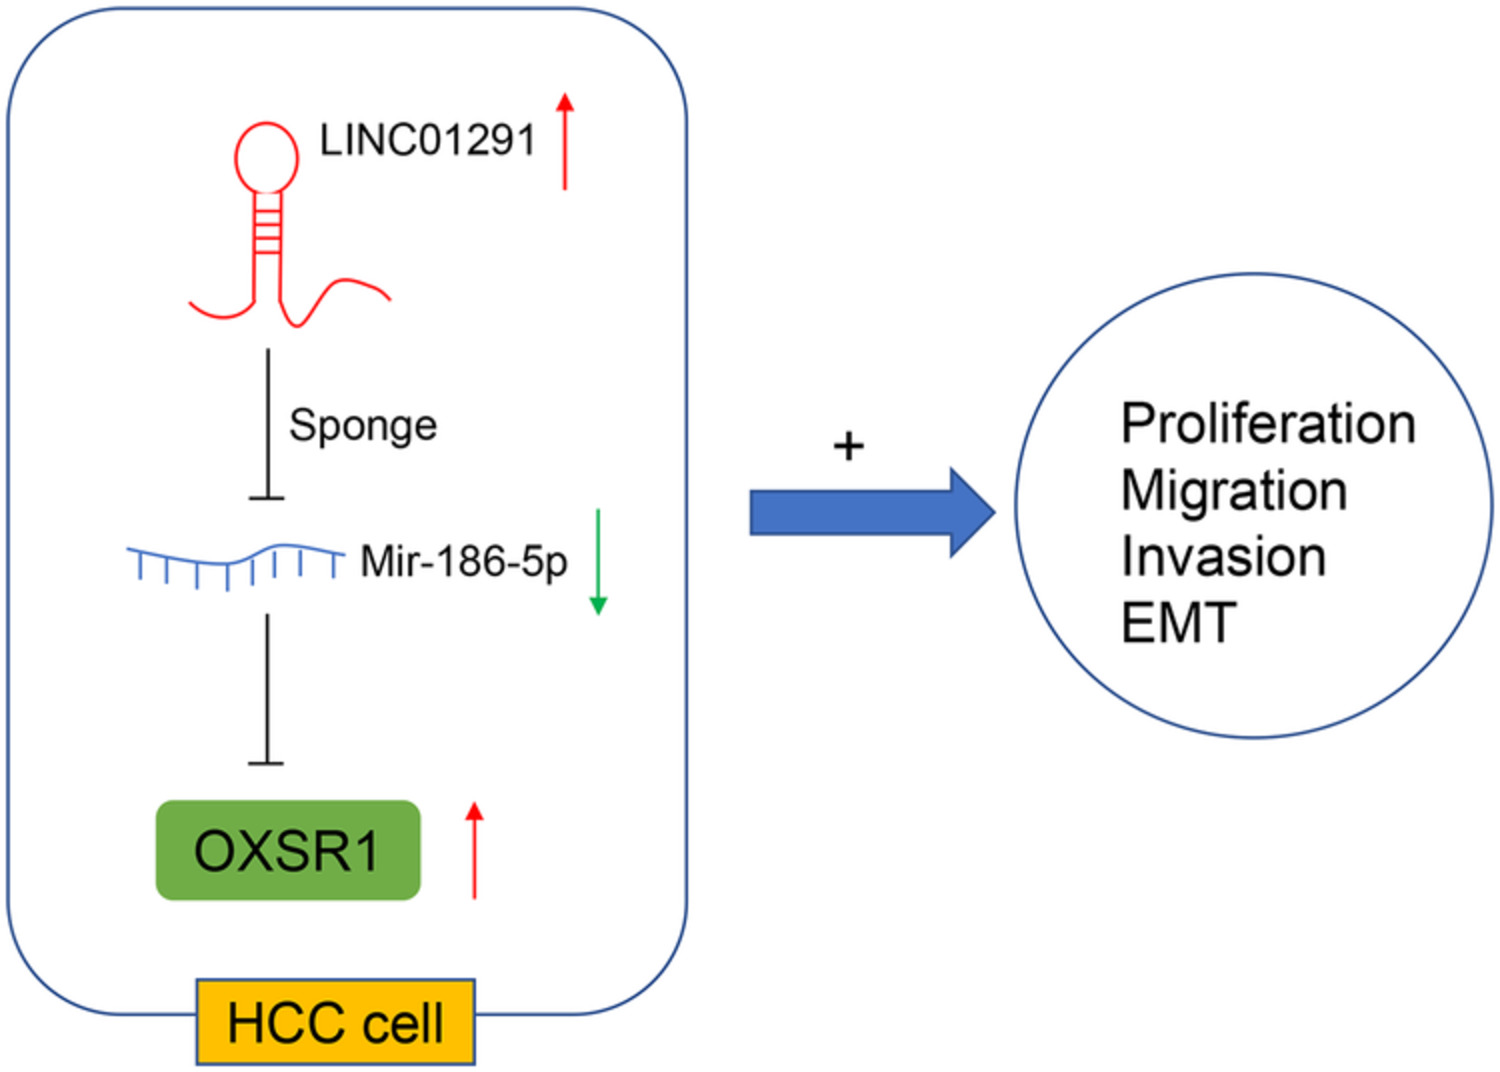 LINC01291 promotes hepatocellular carcinoma development by targeting the miR‐186‐5p/OXSR1 axis